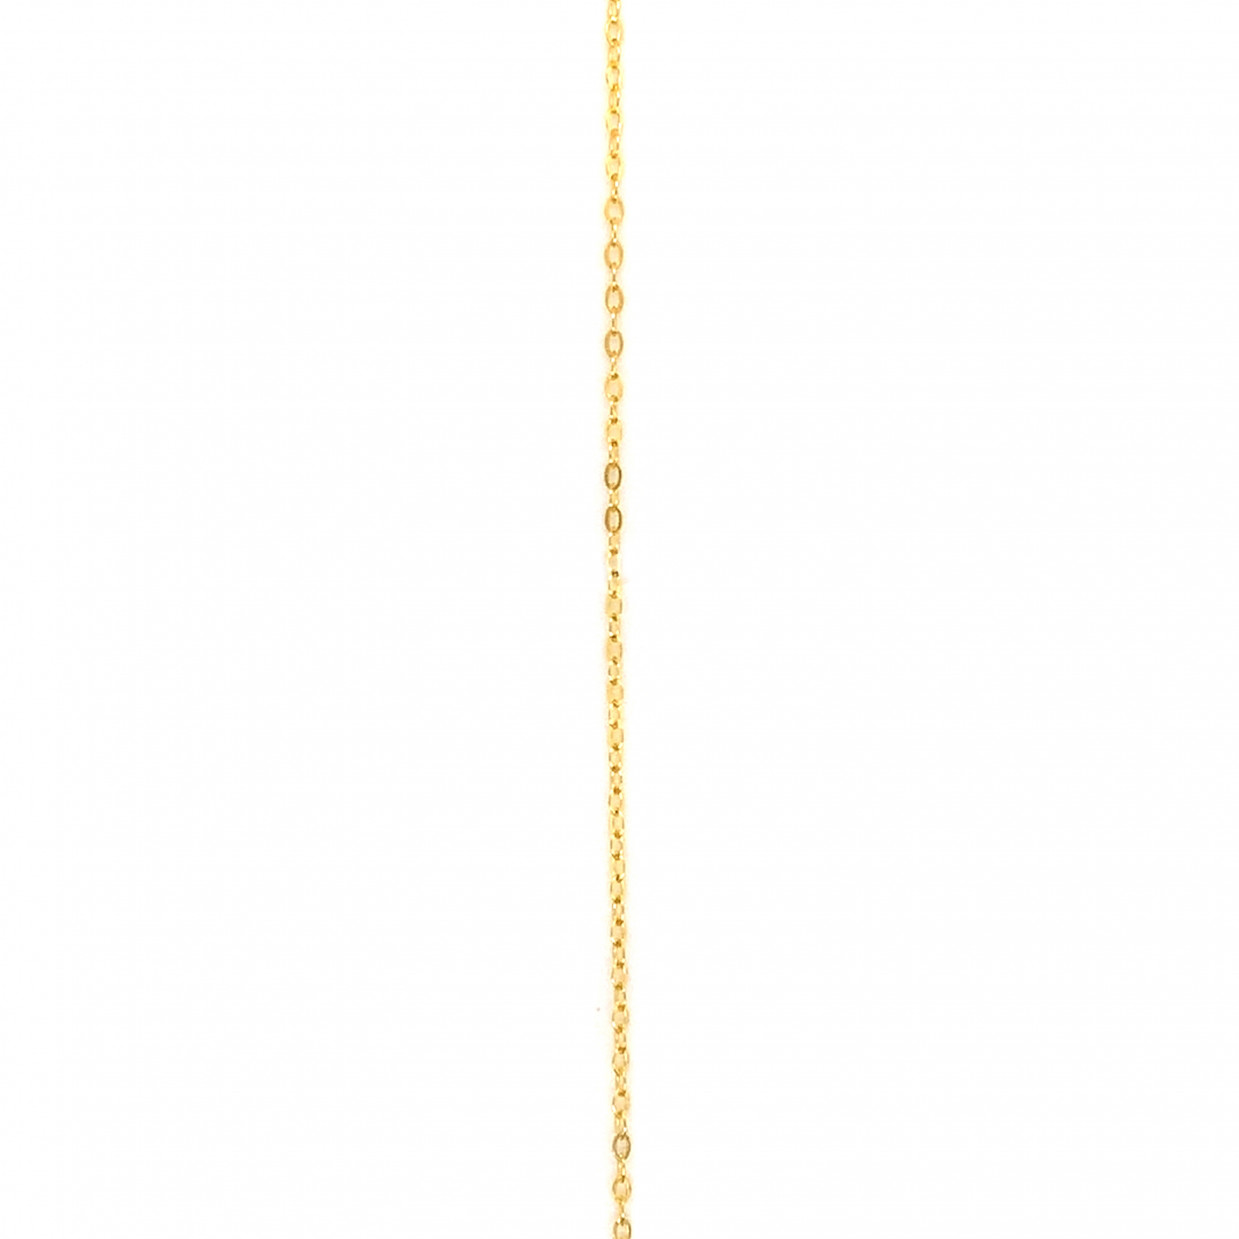 12.5" .925 Sterling Silver Chain - 2" Extension - Gold Plated